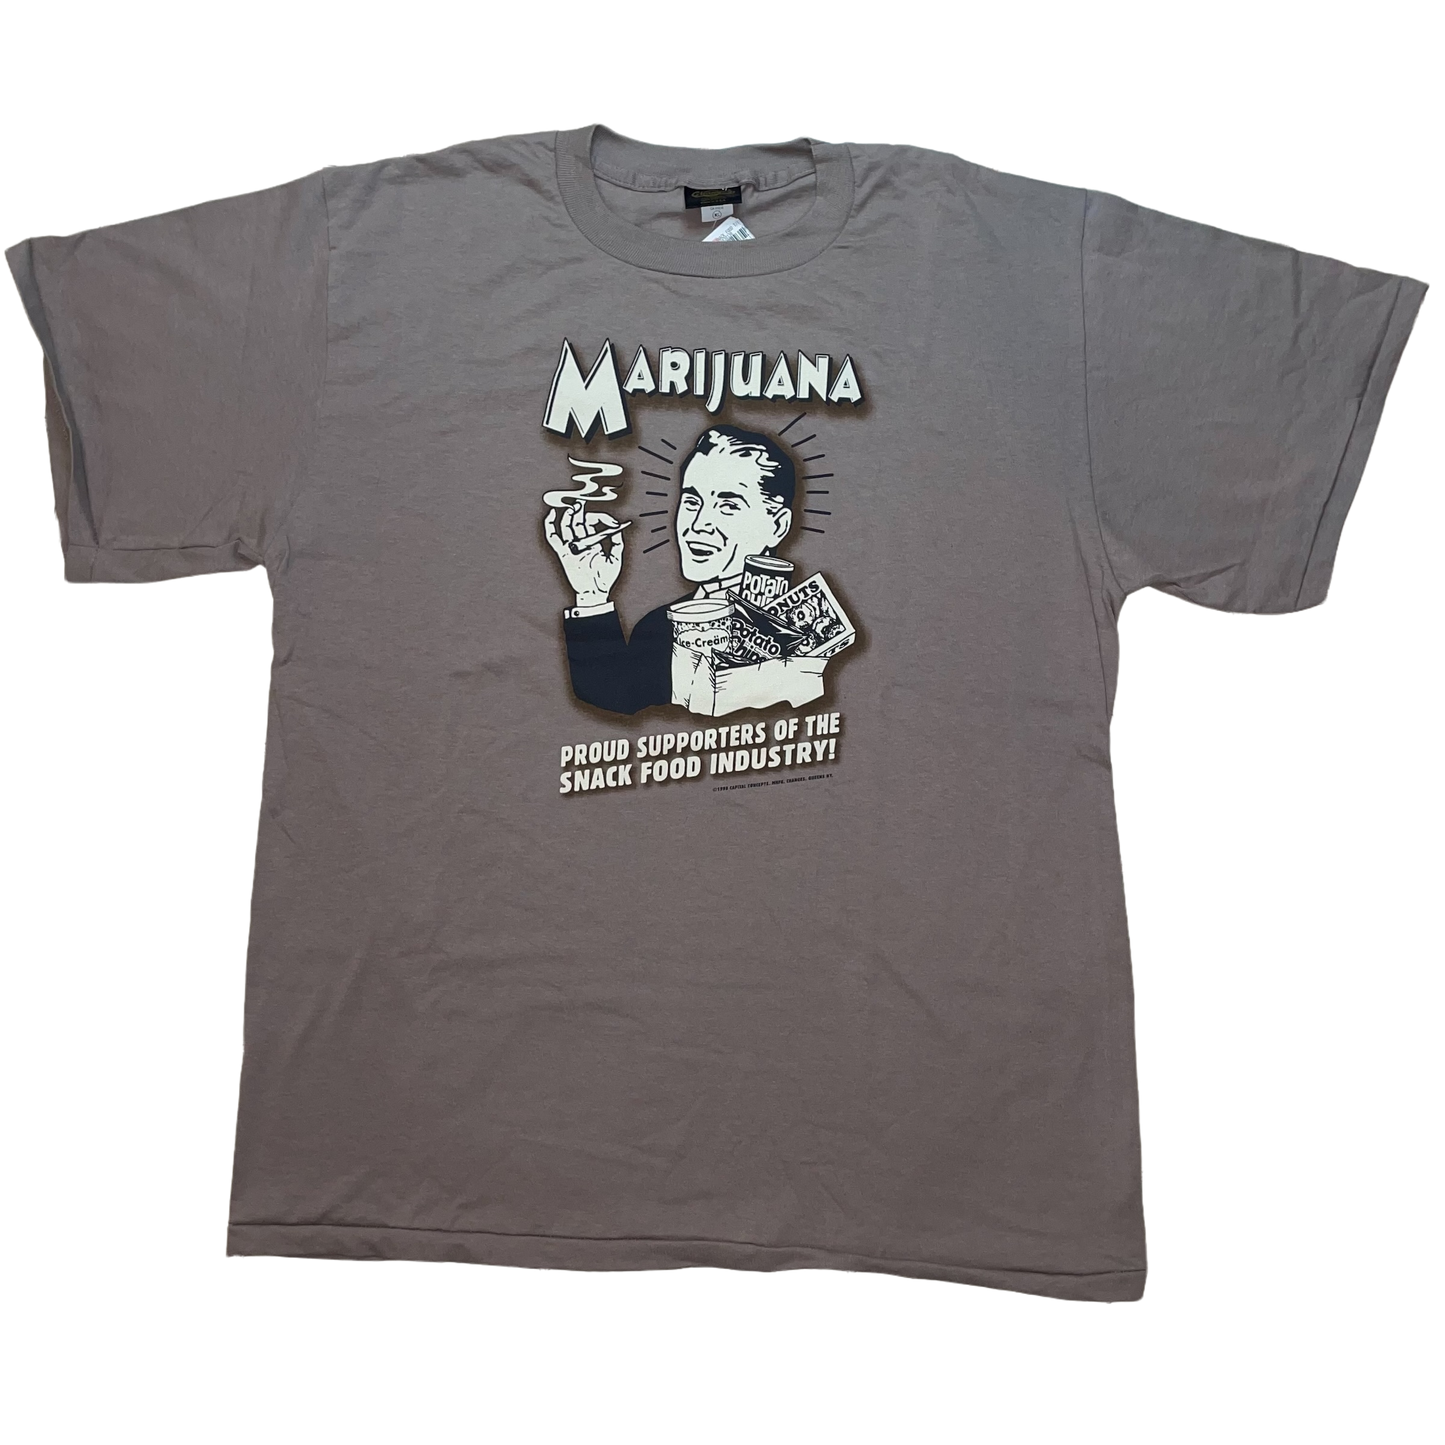 1998 Marijuana Proud Supporters of the Snack Food Industry by Capital Concepts Graphic Tee